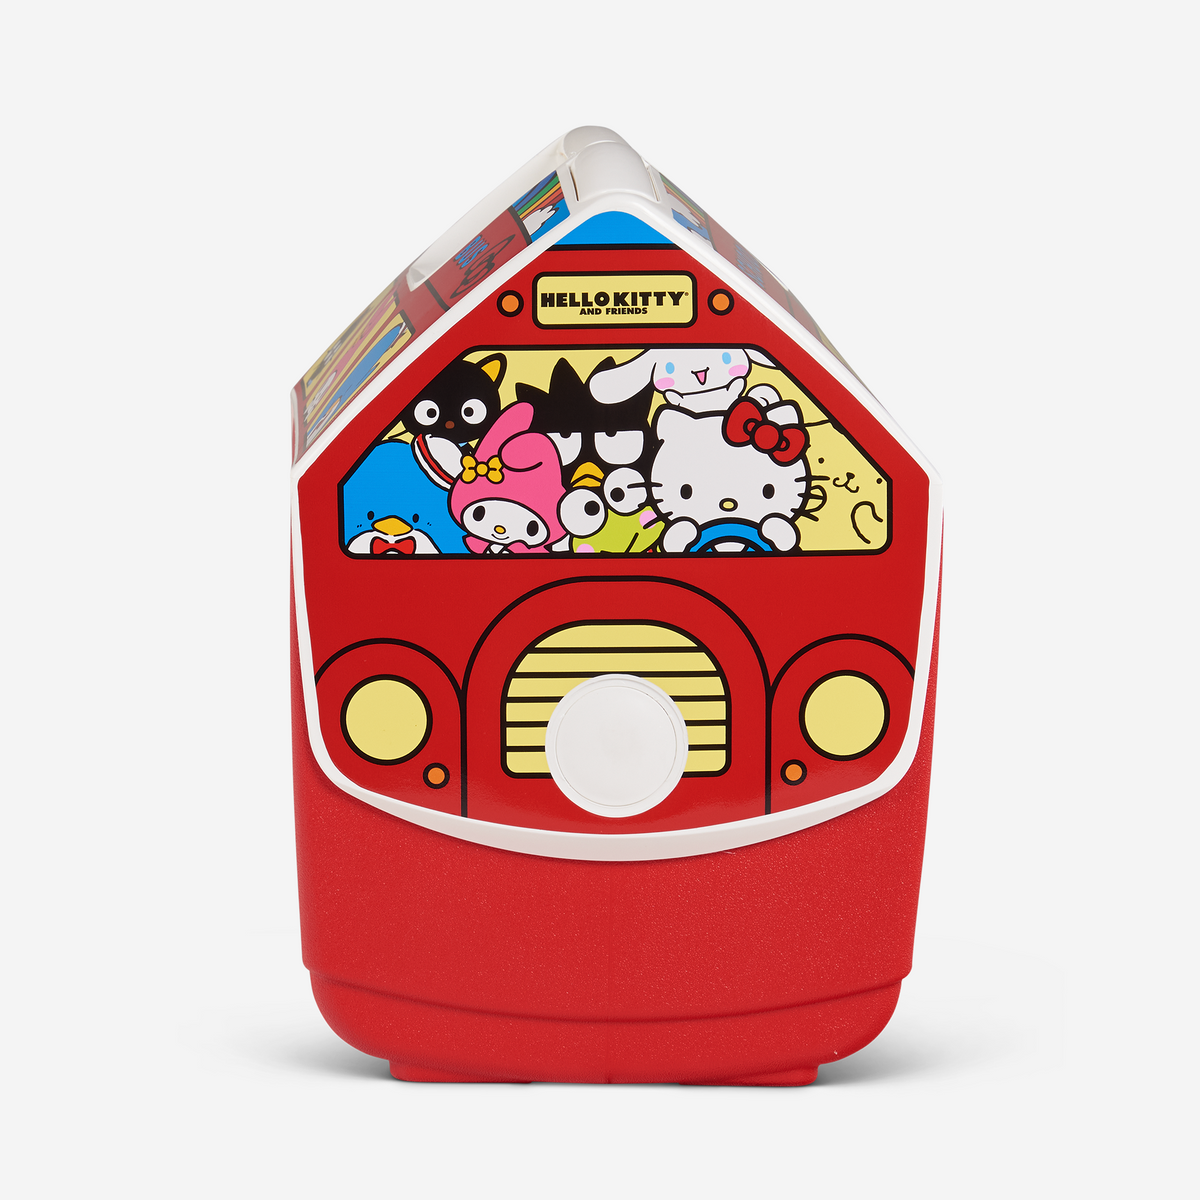 Hello Kitty and Friends x Igloo School Bus Playmate Elite 16 qt Cooler